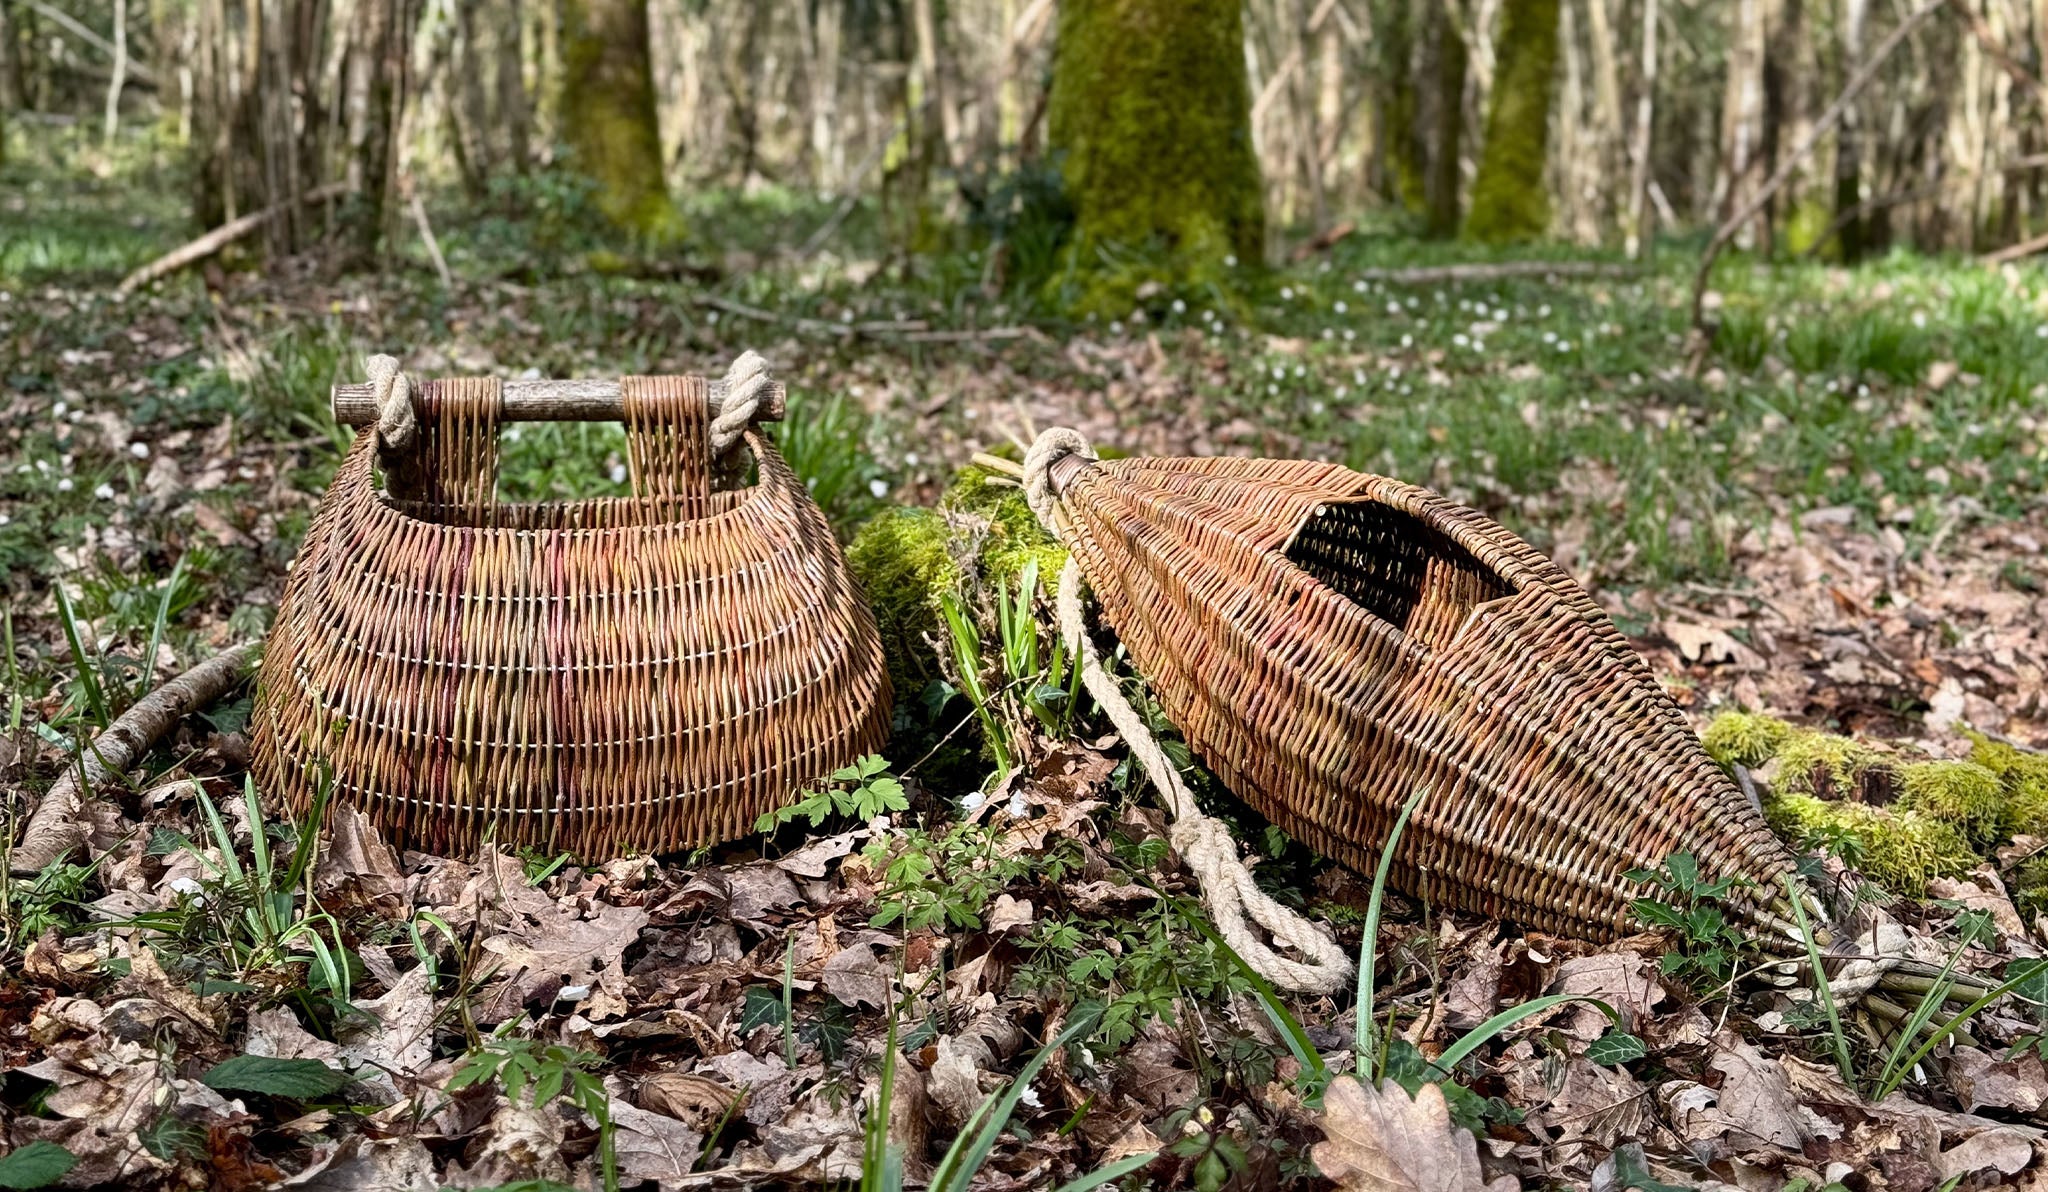 Guernsey Willow Baskets made by Claire Gaudion. Ponier a cou fishing baskets and Guernsey Courge pictured in woodland.